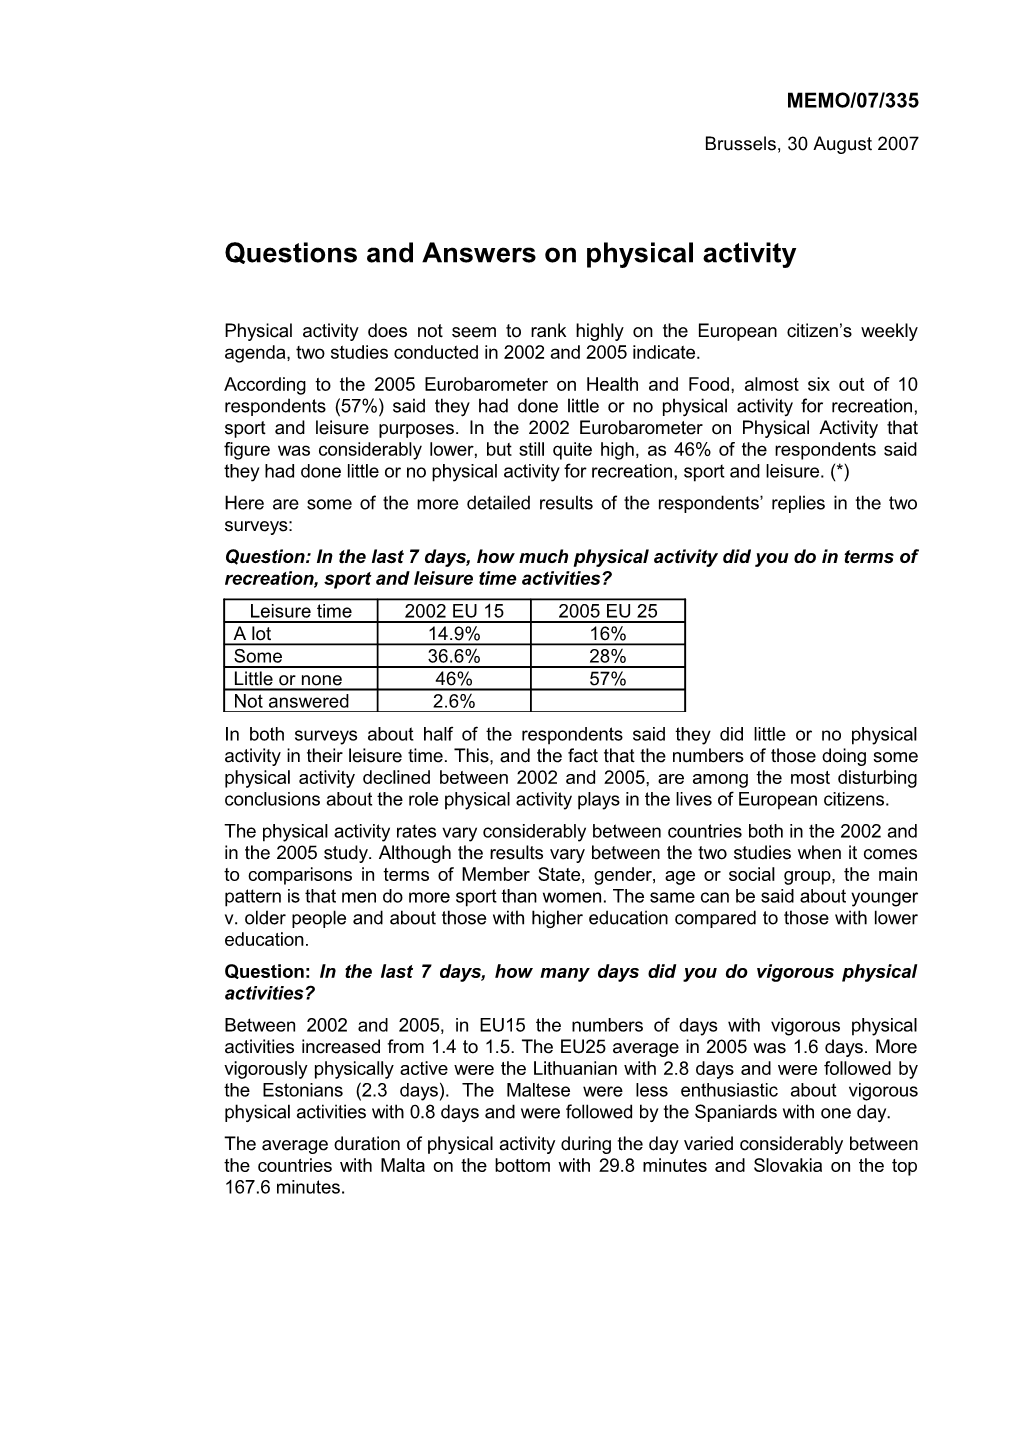 Questions and Answers on Physical Activity